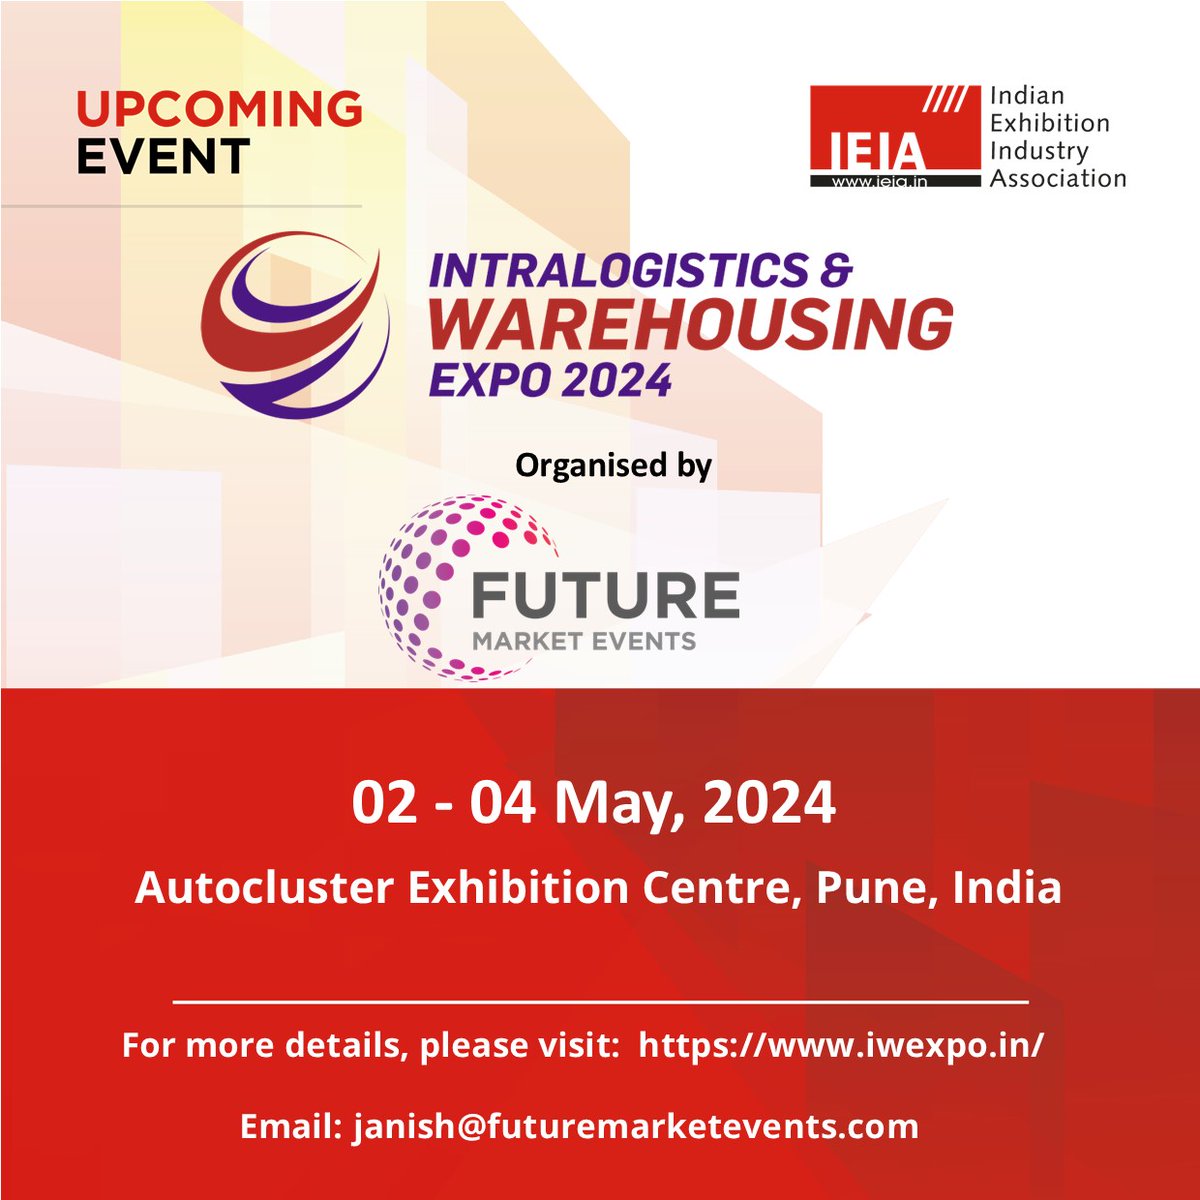 #IEIA upcoming member event: Intralogistics & Warehousing Expo
For more details: iwexpo.in  
#IntralogisticsAndWarehousingExpo #IntralogisticsAndWarehousingExpo2024 #IntralogisticsAndWarehousingExpoPune #IEIA #Exhibitions  
Be a member now- lnkd.in/gejg-Jh